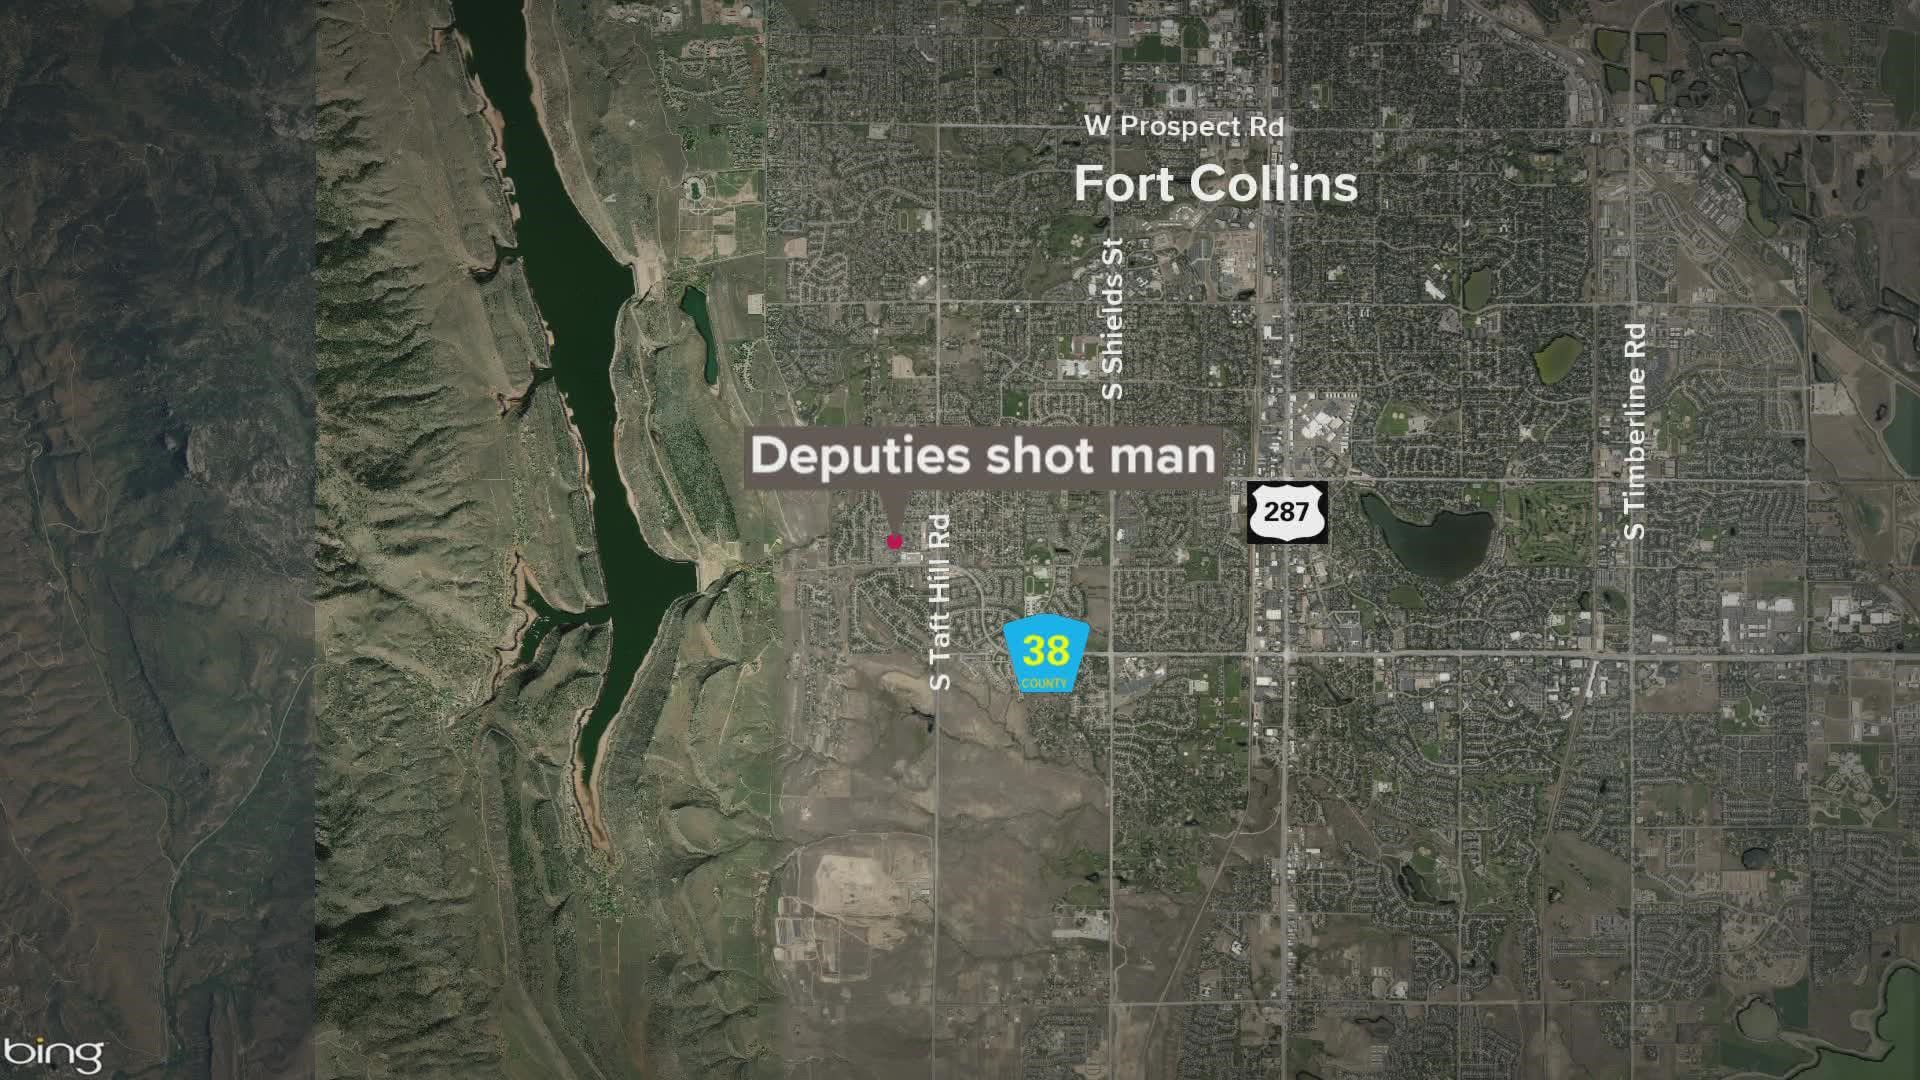 The fatal shooting happened Thursday morning in the 2300 block of Harmony Road in Fort Collins, according to the Sheriff's Office.